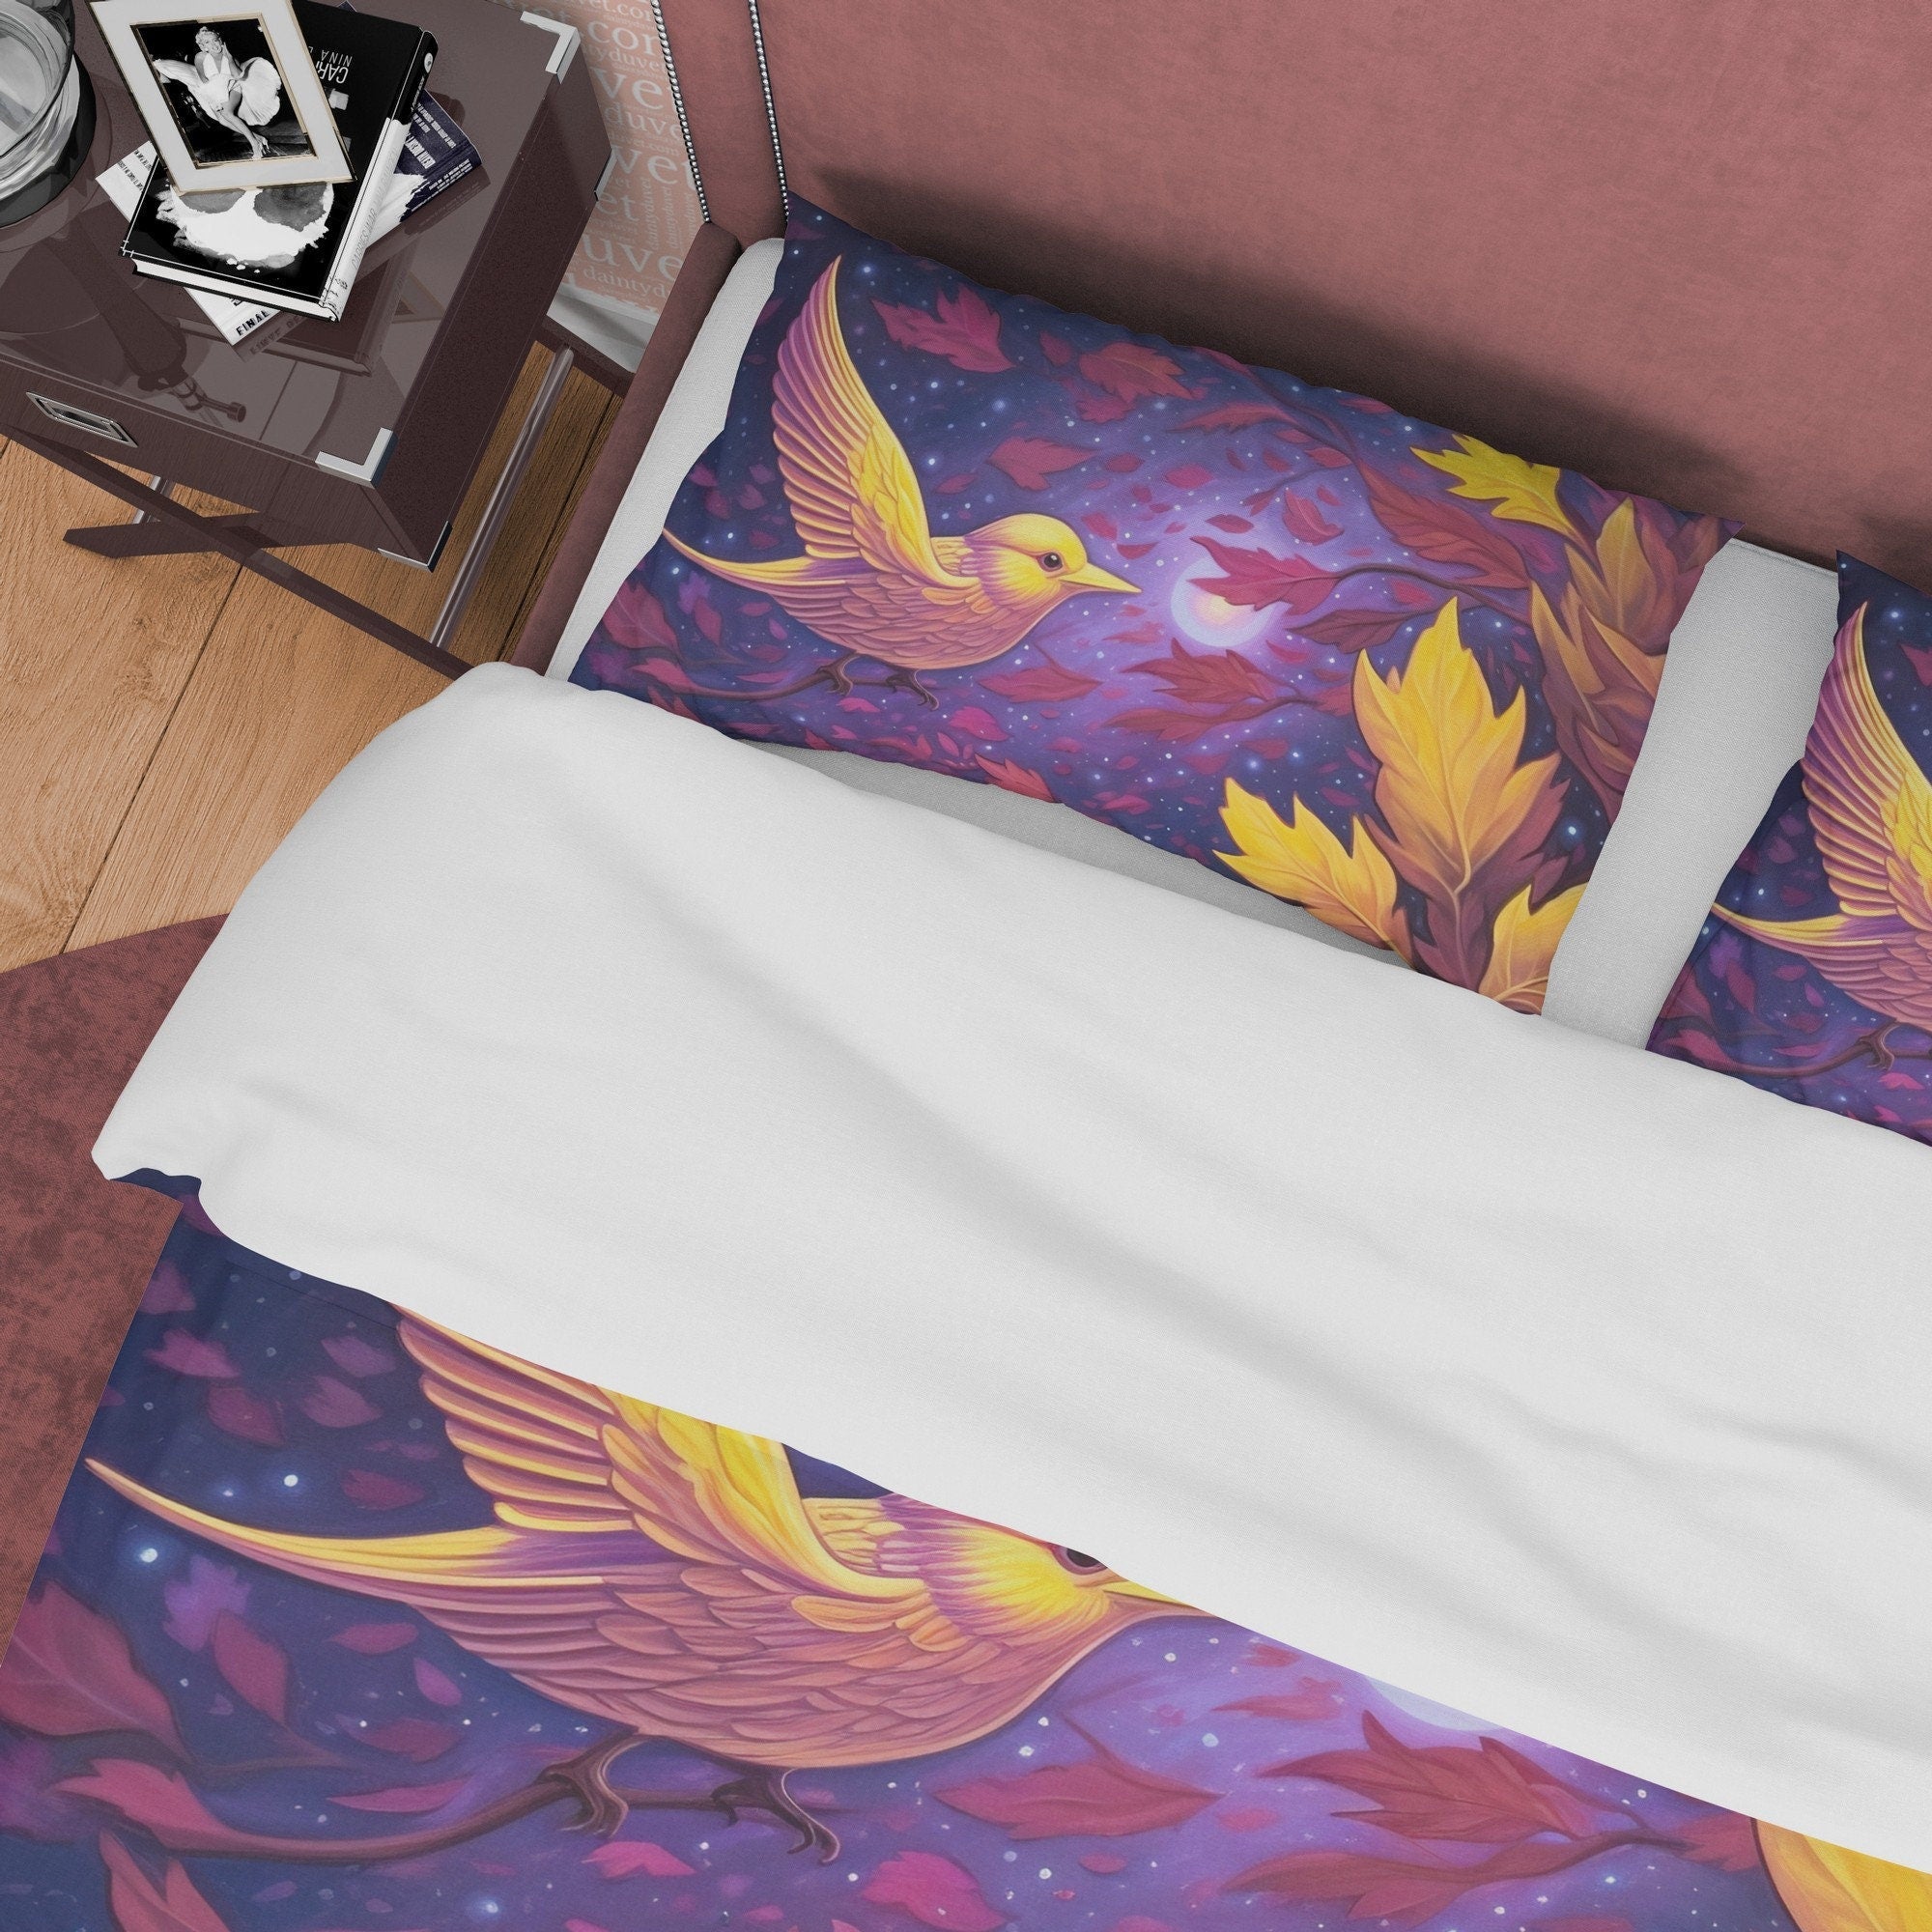 Purple Duvet Cover with Bird in Purple Galaxy Stars, Autumn Bedding Set, Warm Autumn Colors Printed Quilt Cover, Foliage Bedspread